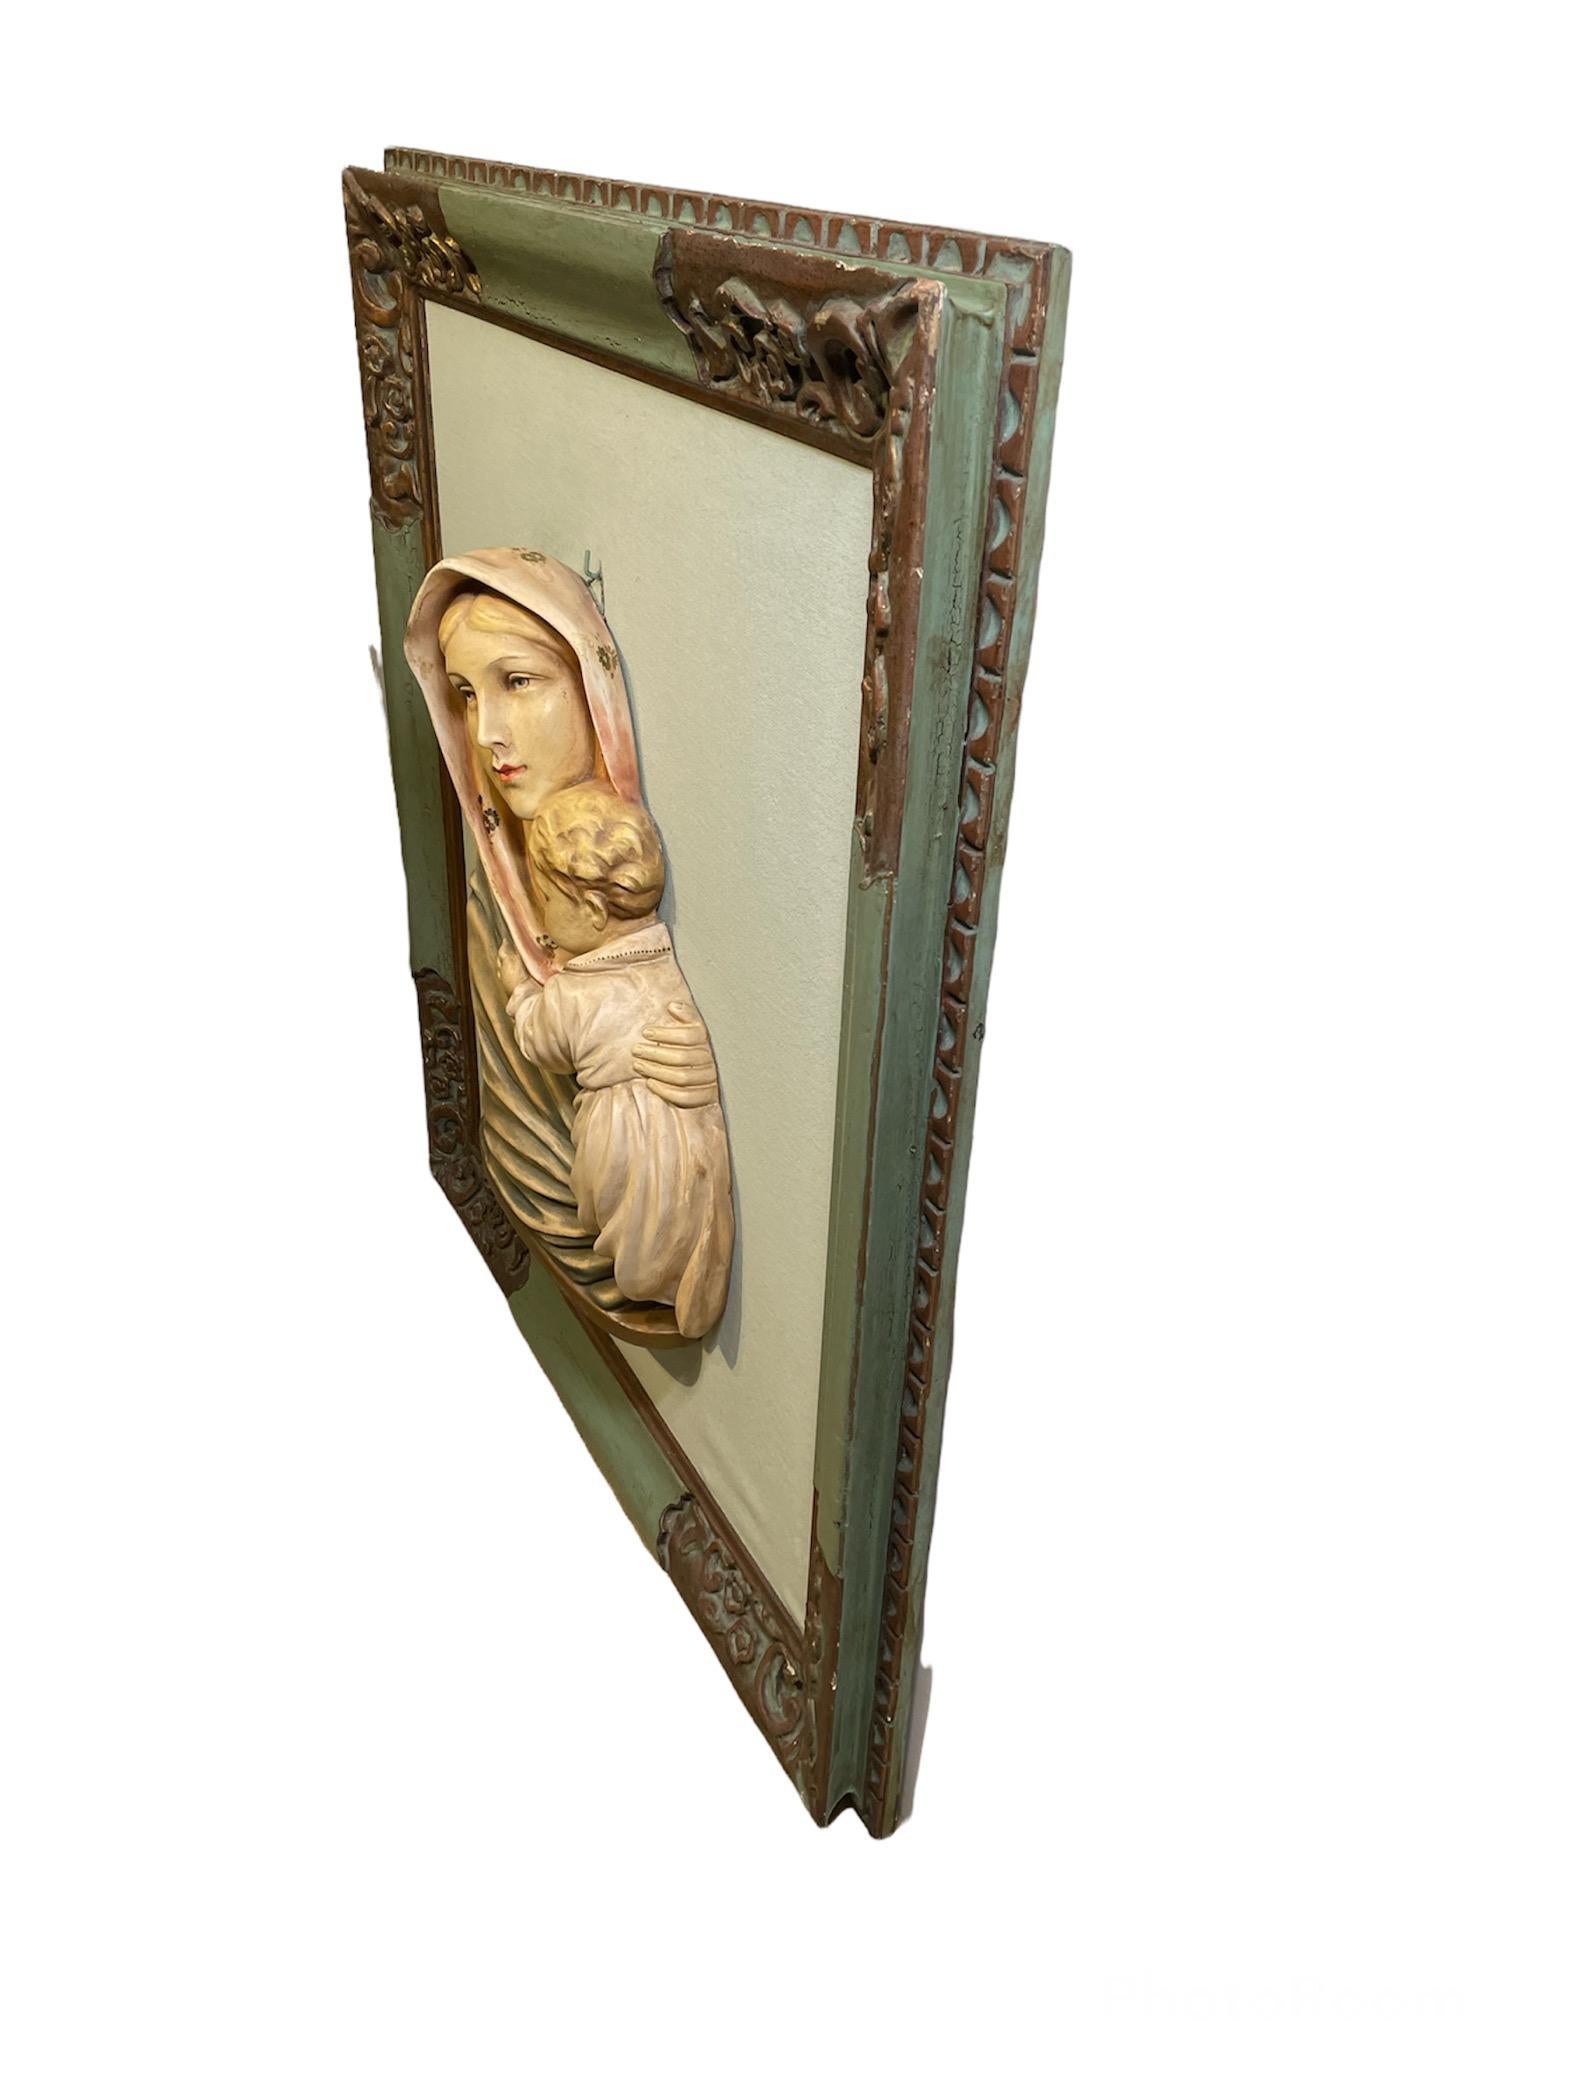 Unknown Virgin Mary and Baby Jesus Ceramic Sculpture/Relief Frame For Sale